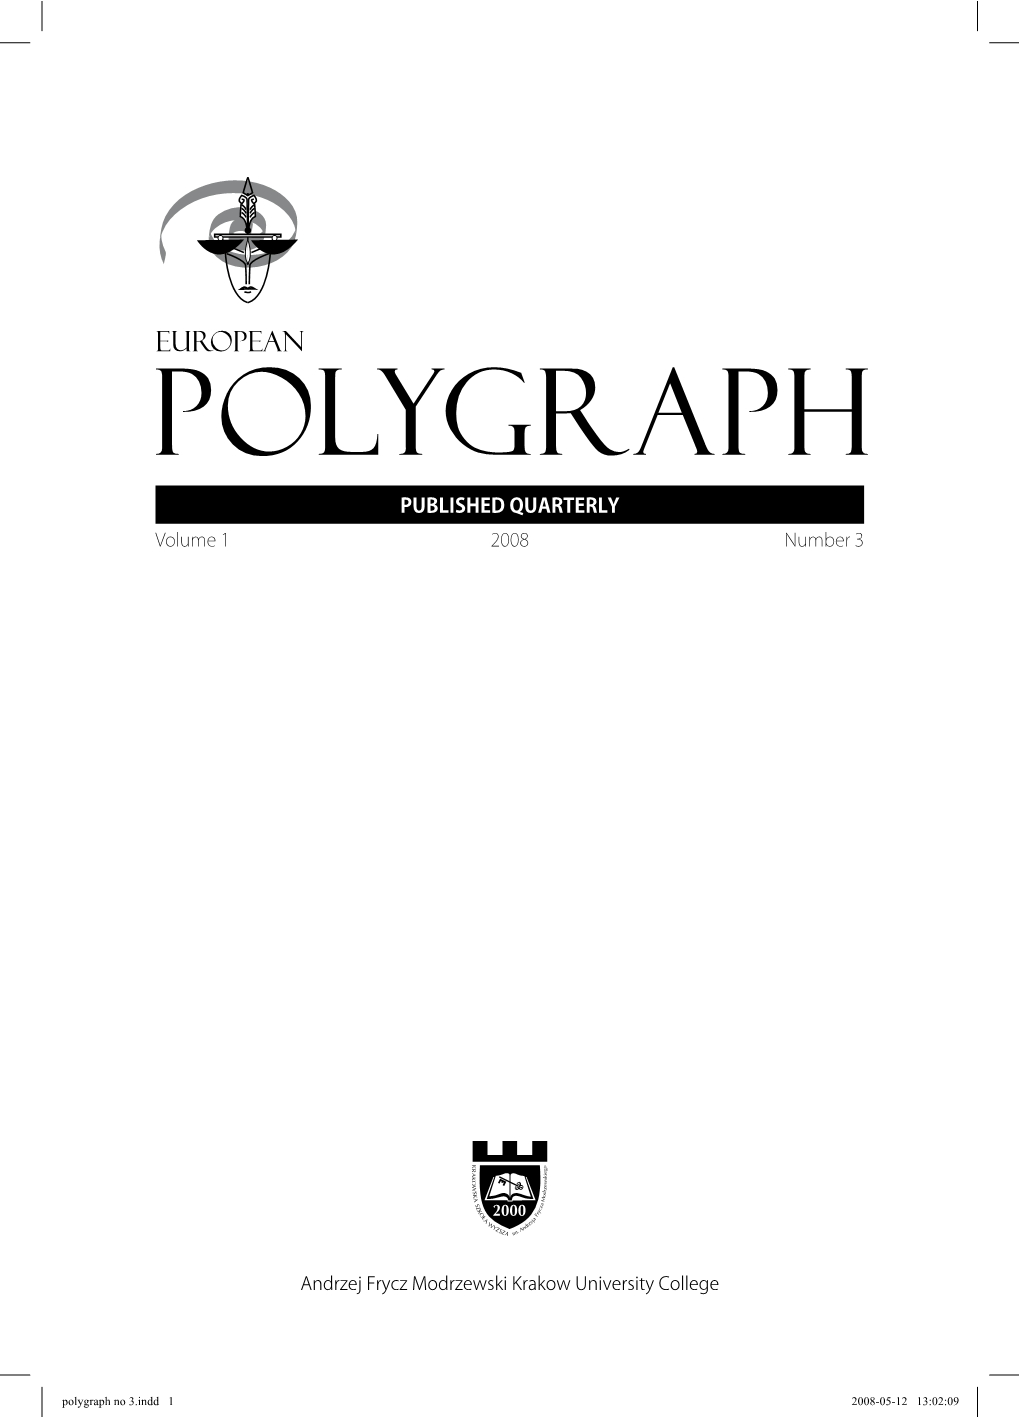 Polygraph examinations in Poland Cover Image